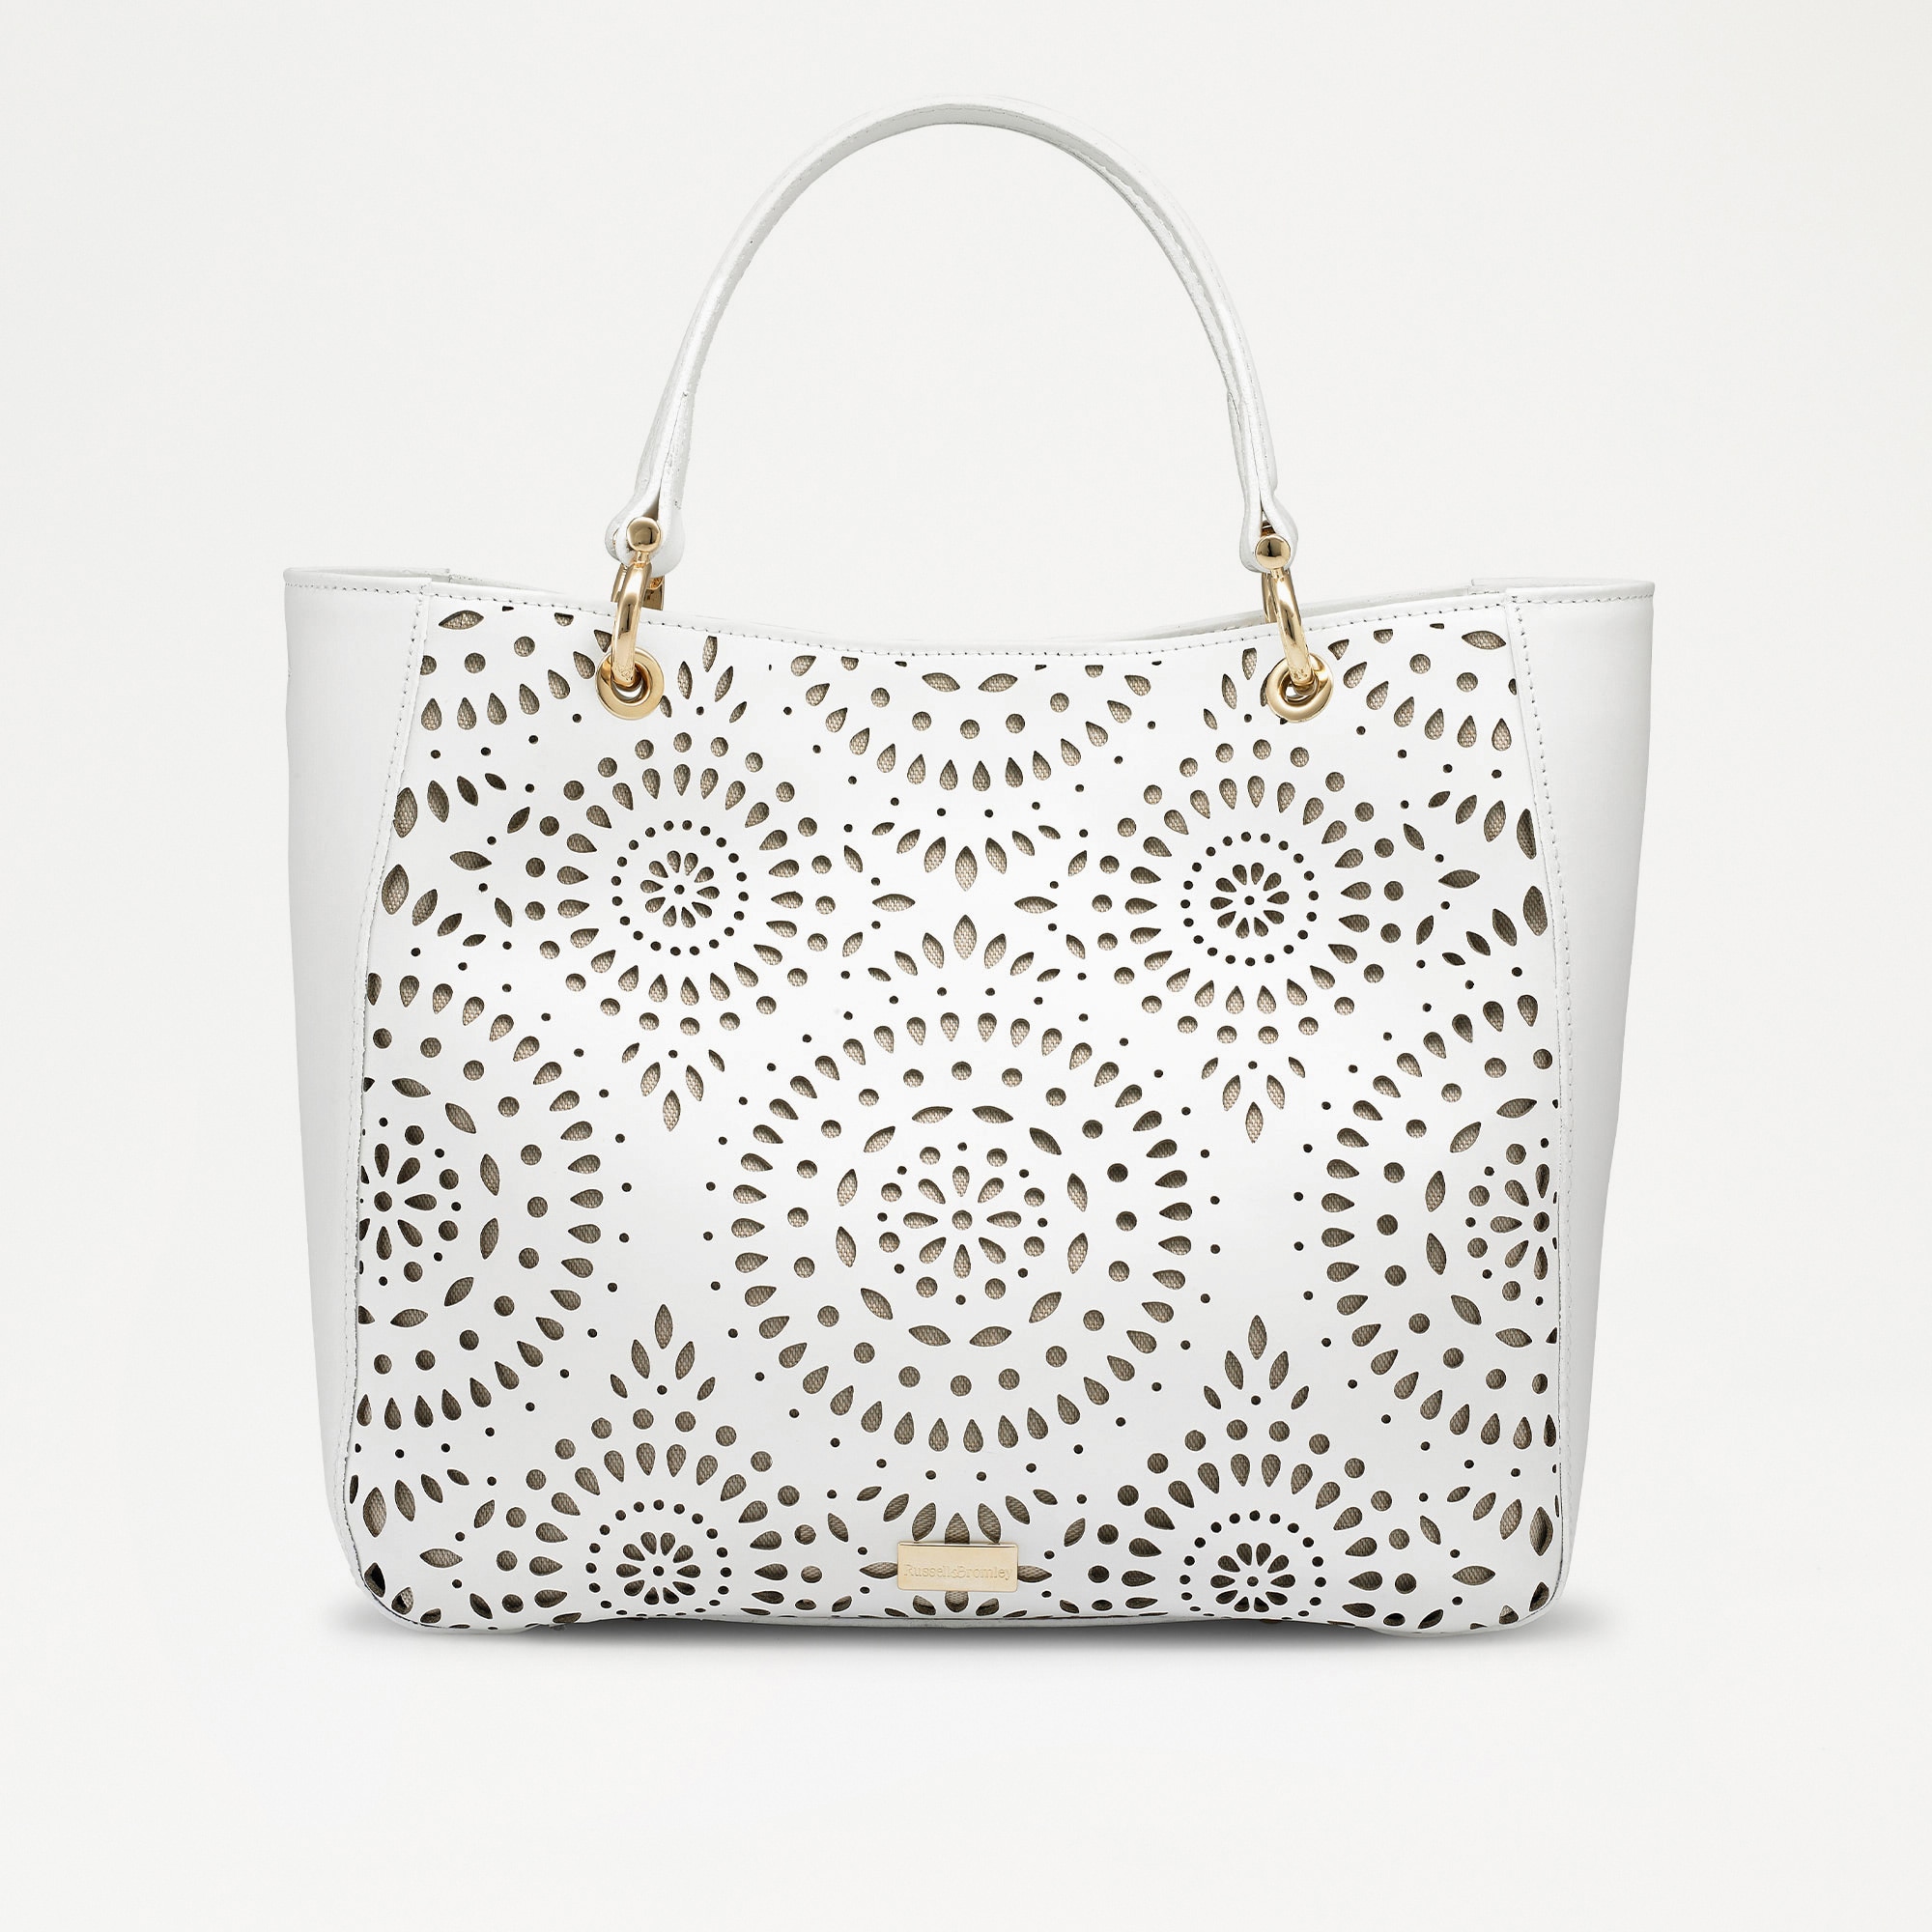 Russell & Bromley Women's White Leather Laser Cut Morocco Tote Bag